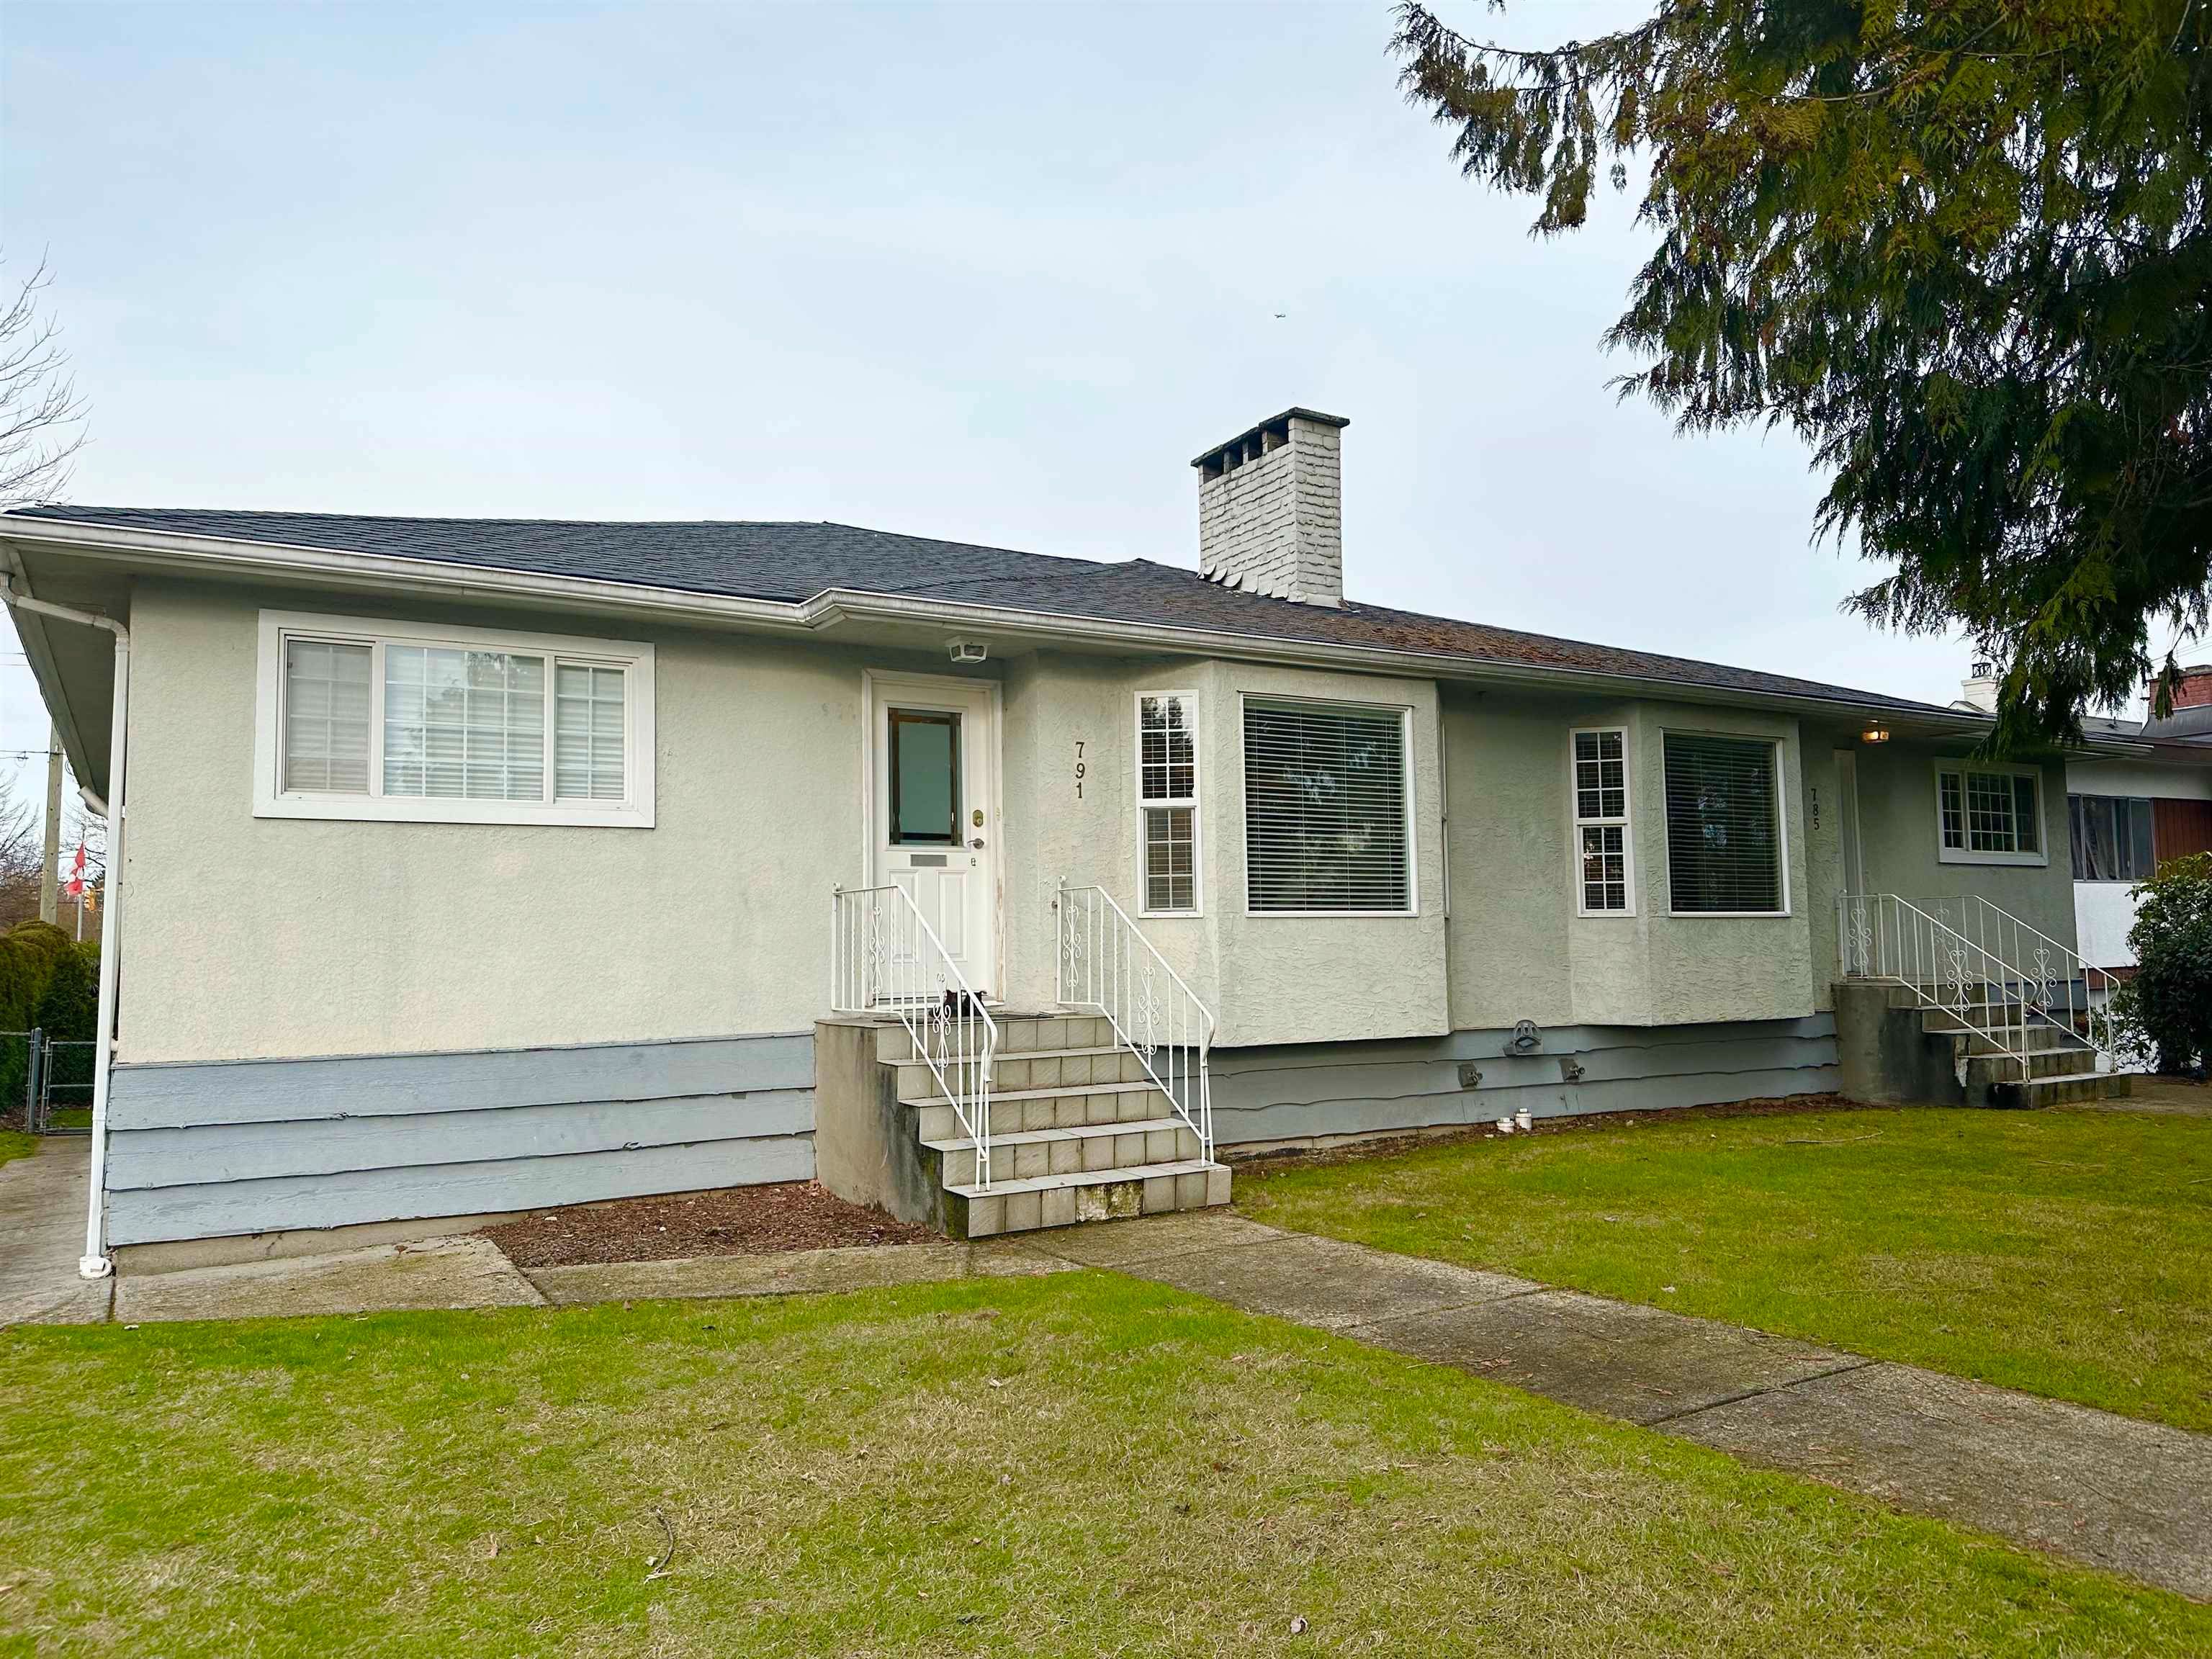 We have sold a property at 785-791 42ND AVE W in Vancouver